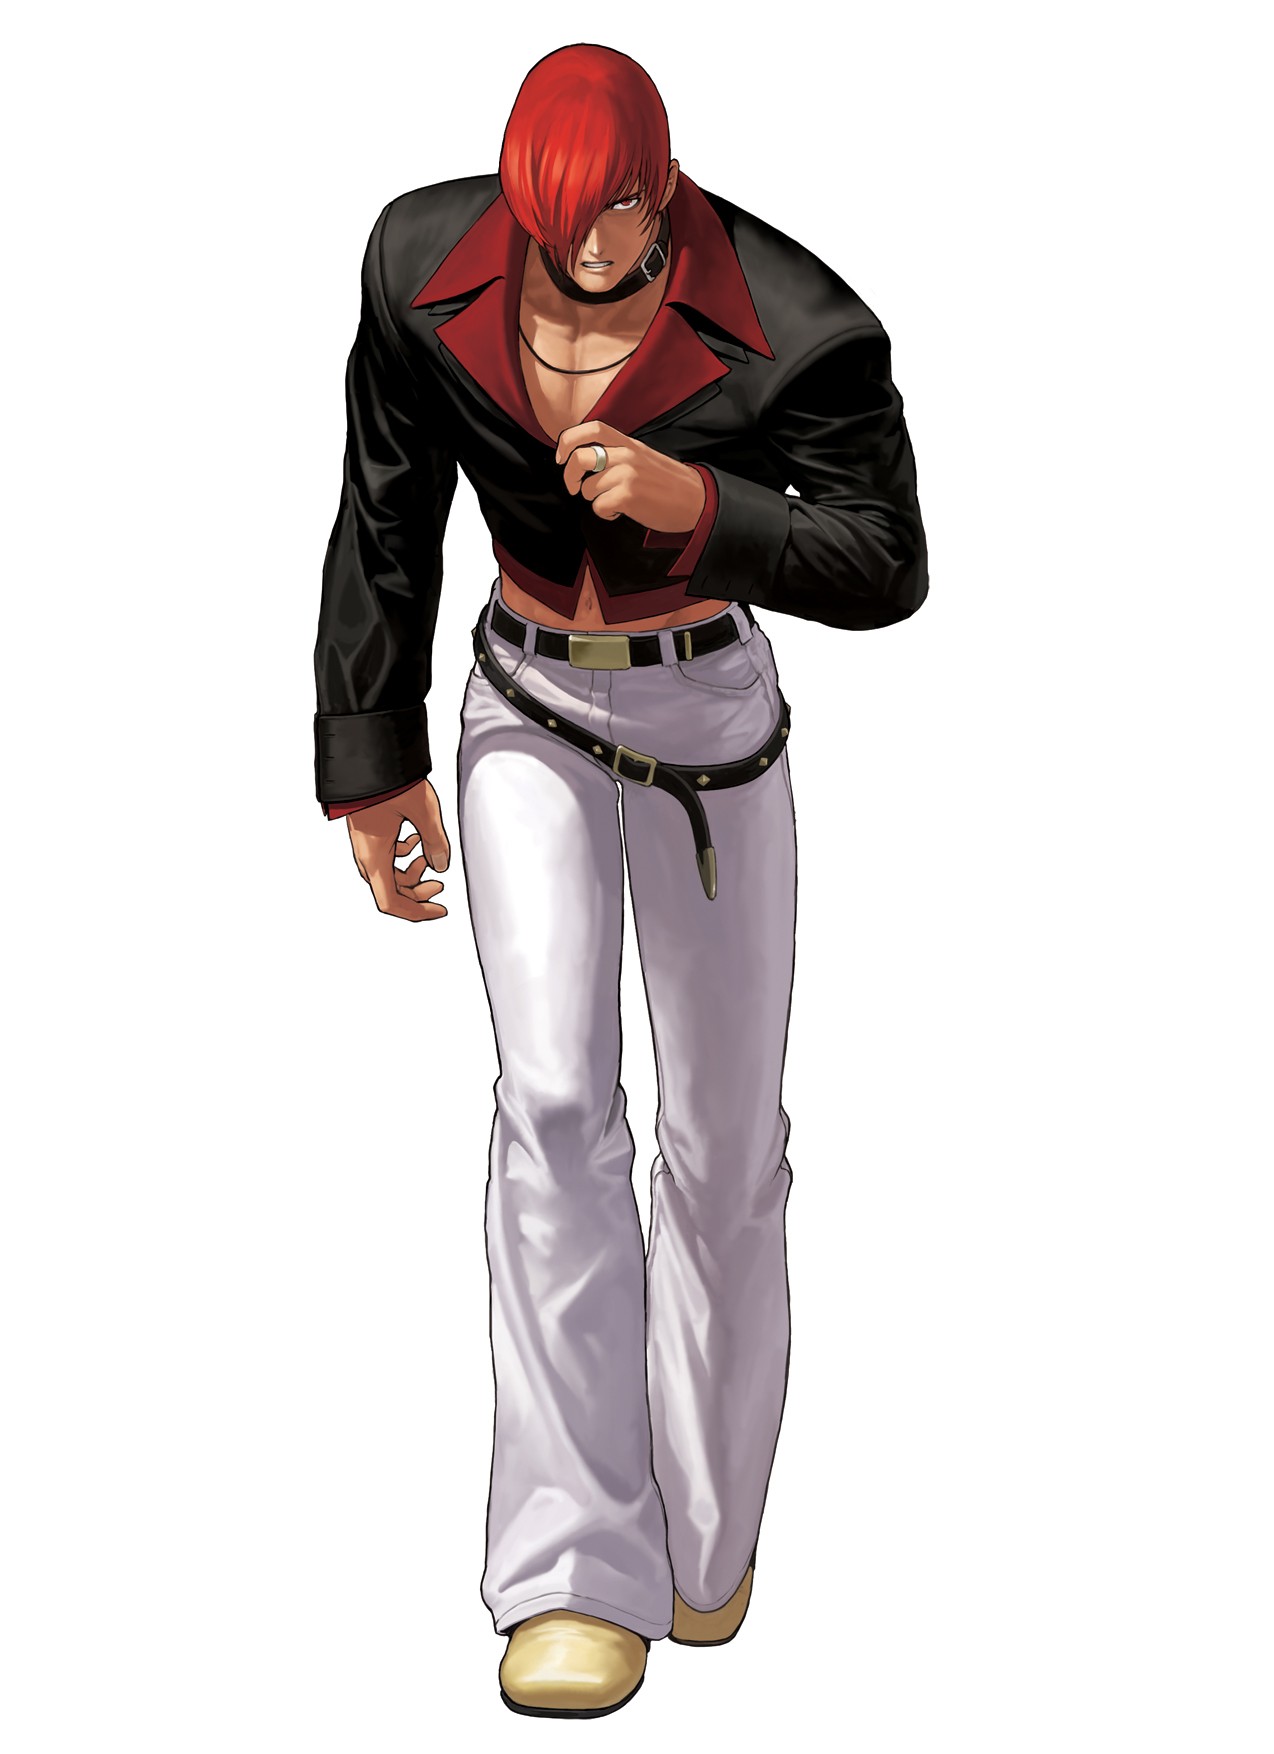 THE KING OF FIGHTERS 2003 [IORI YAGAMI]